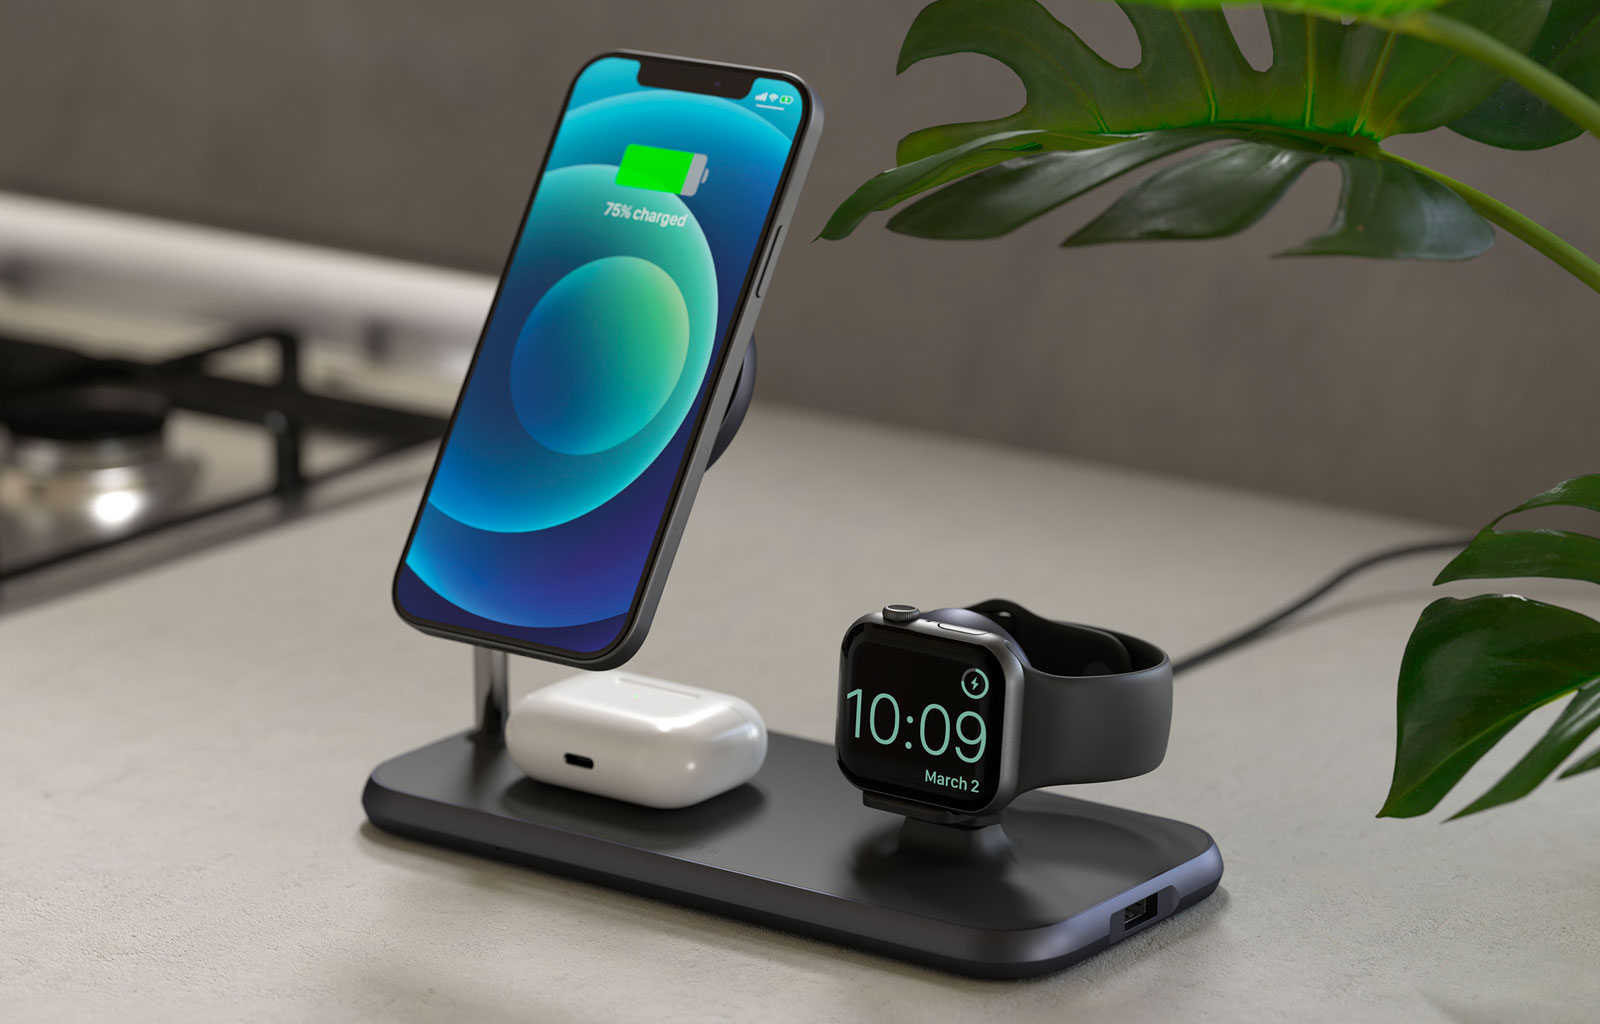 4-in-1 wireless chargers